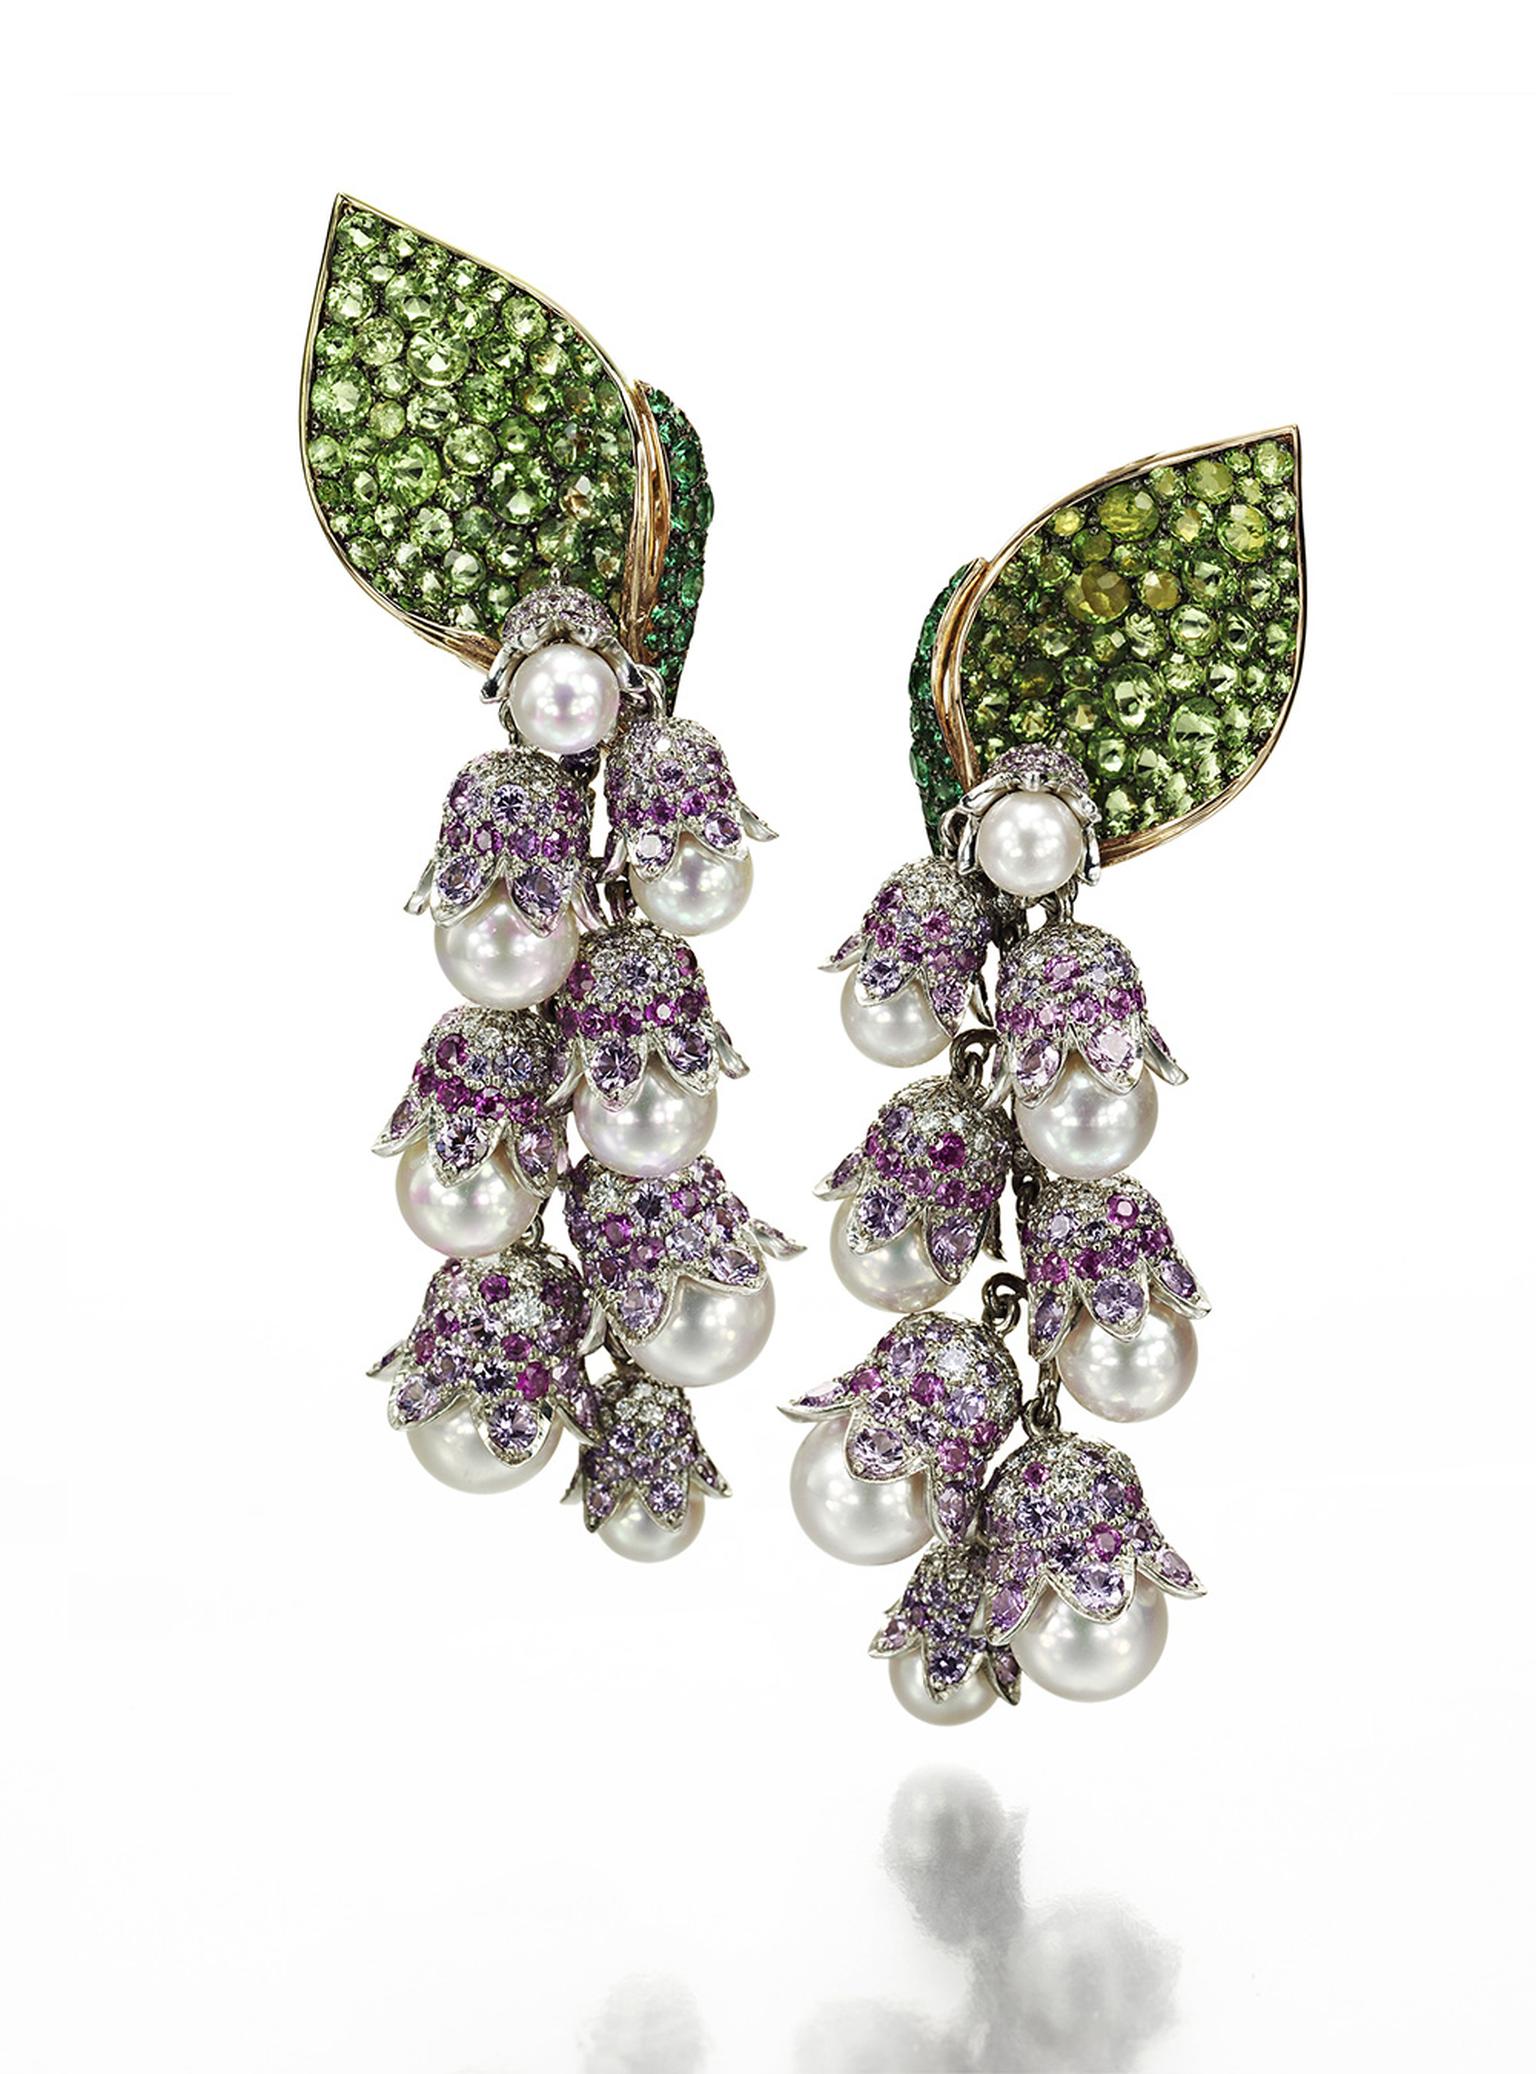 SuzanneSyzSarlepearlearrings